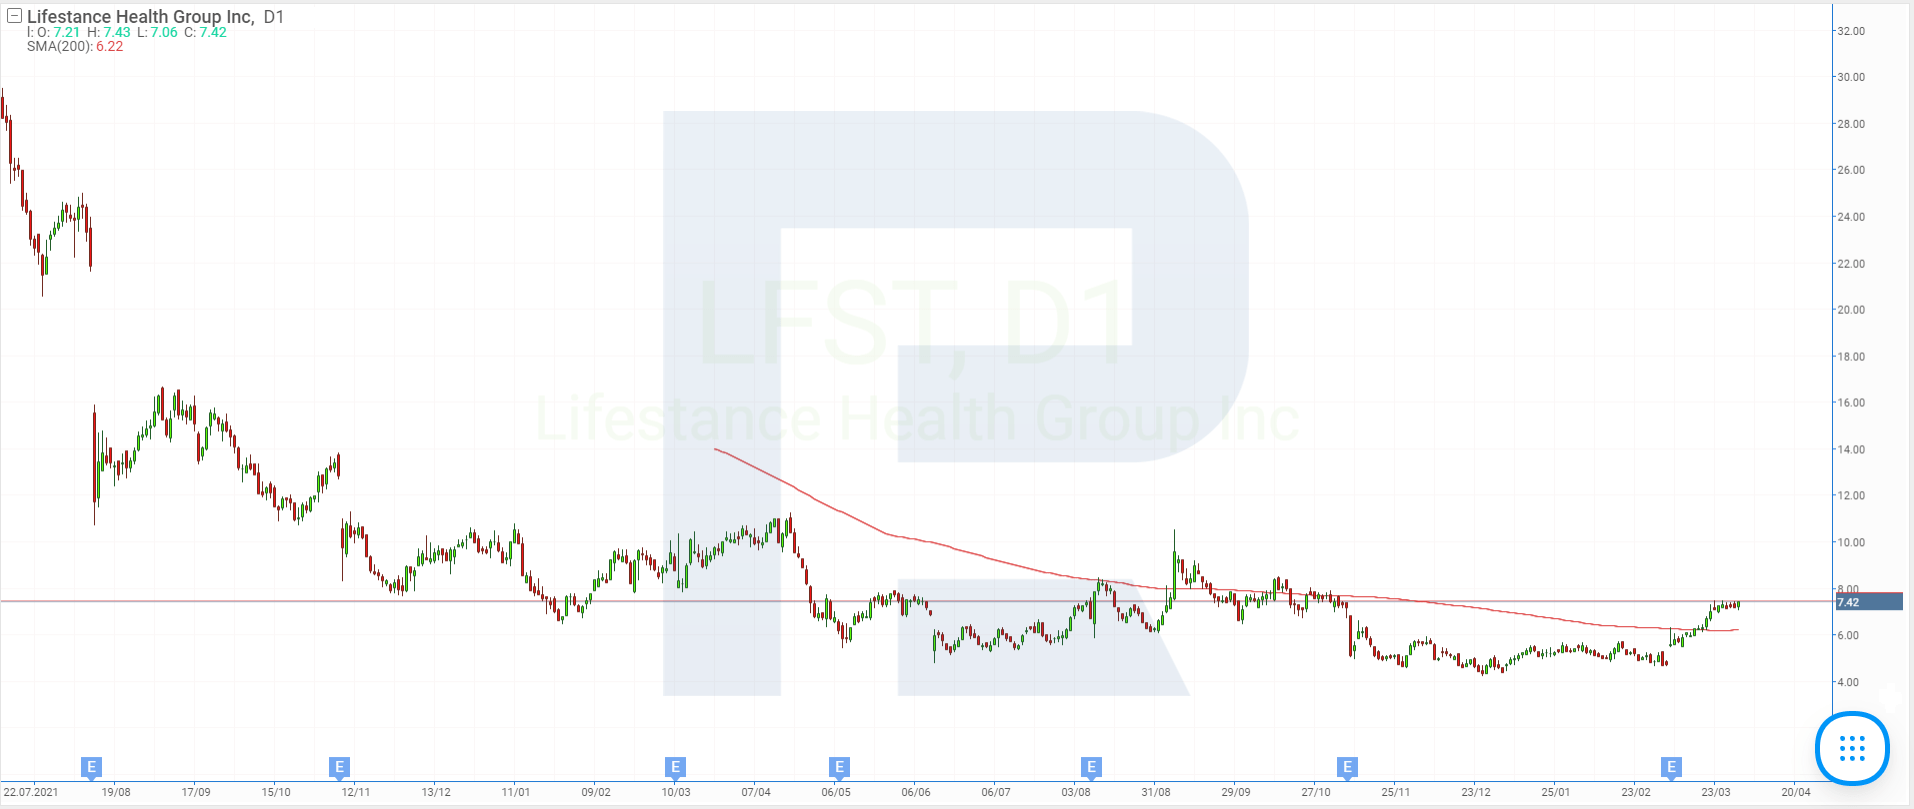 Stock price charts of LifeStance Health Group Inc.